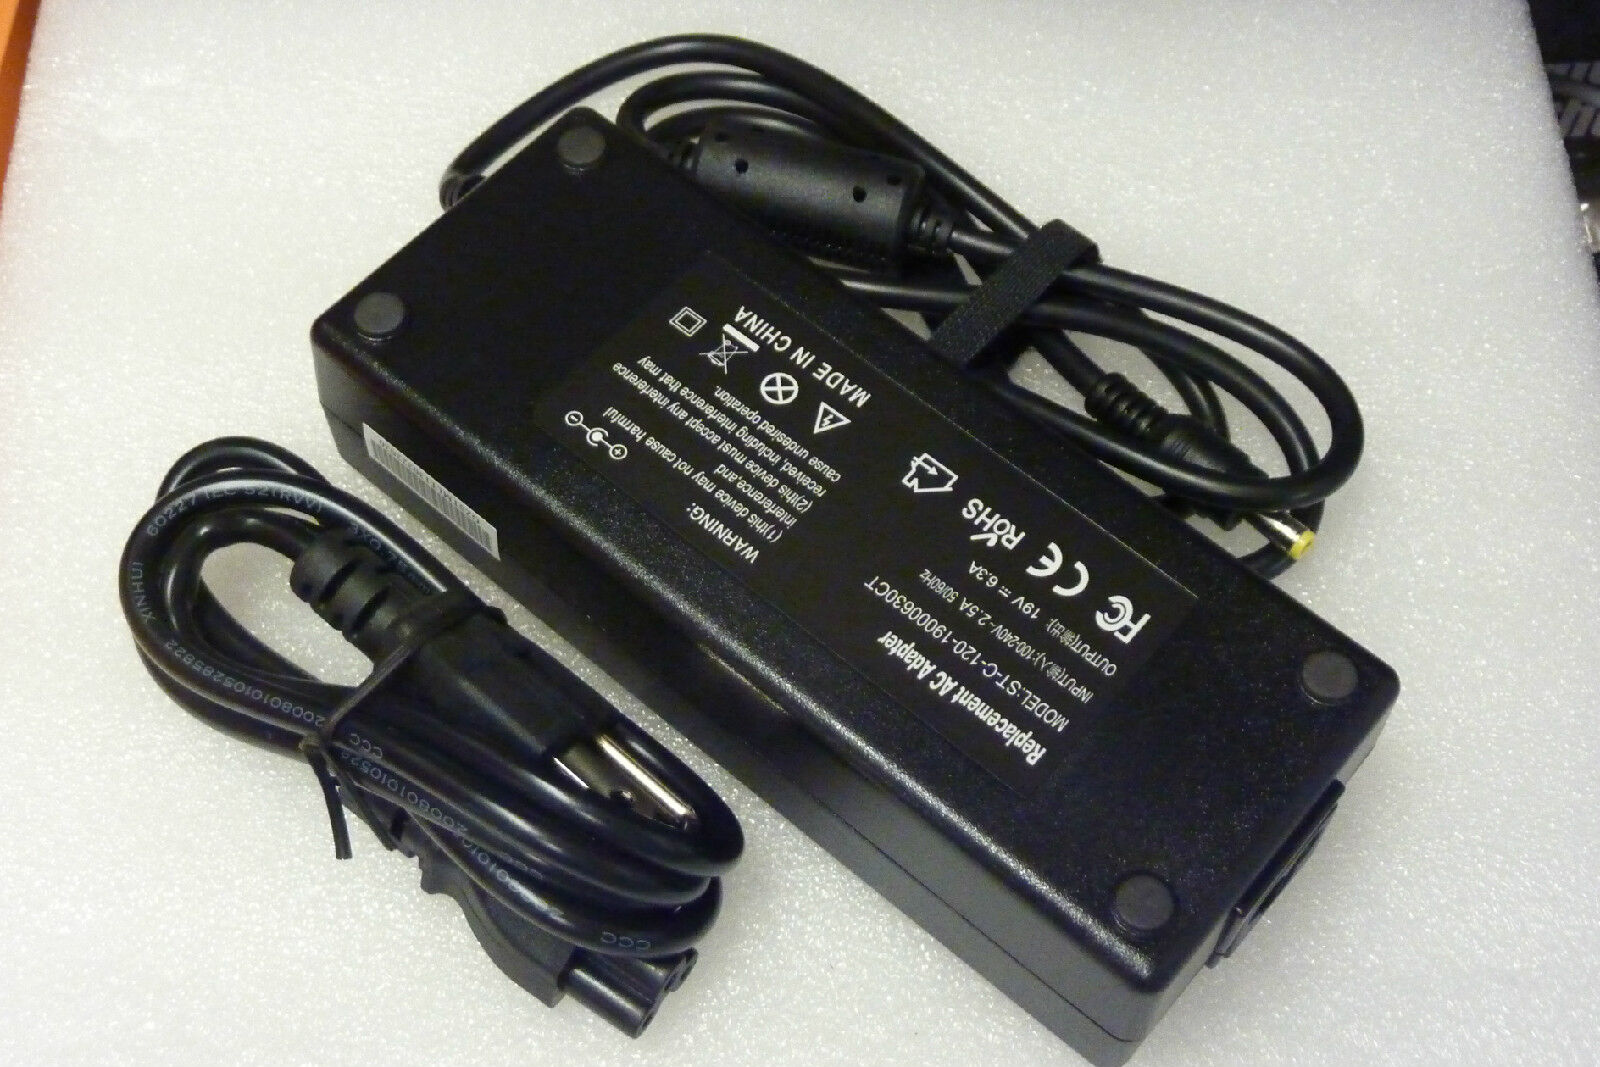 NEW AC ADAPTER CHARGER POWER CORD FOR Toshiba All In One LX810 LX815 LX830 LX835